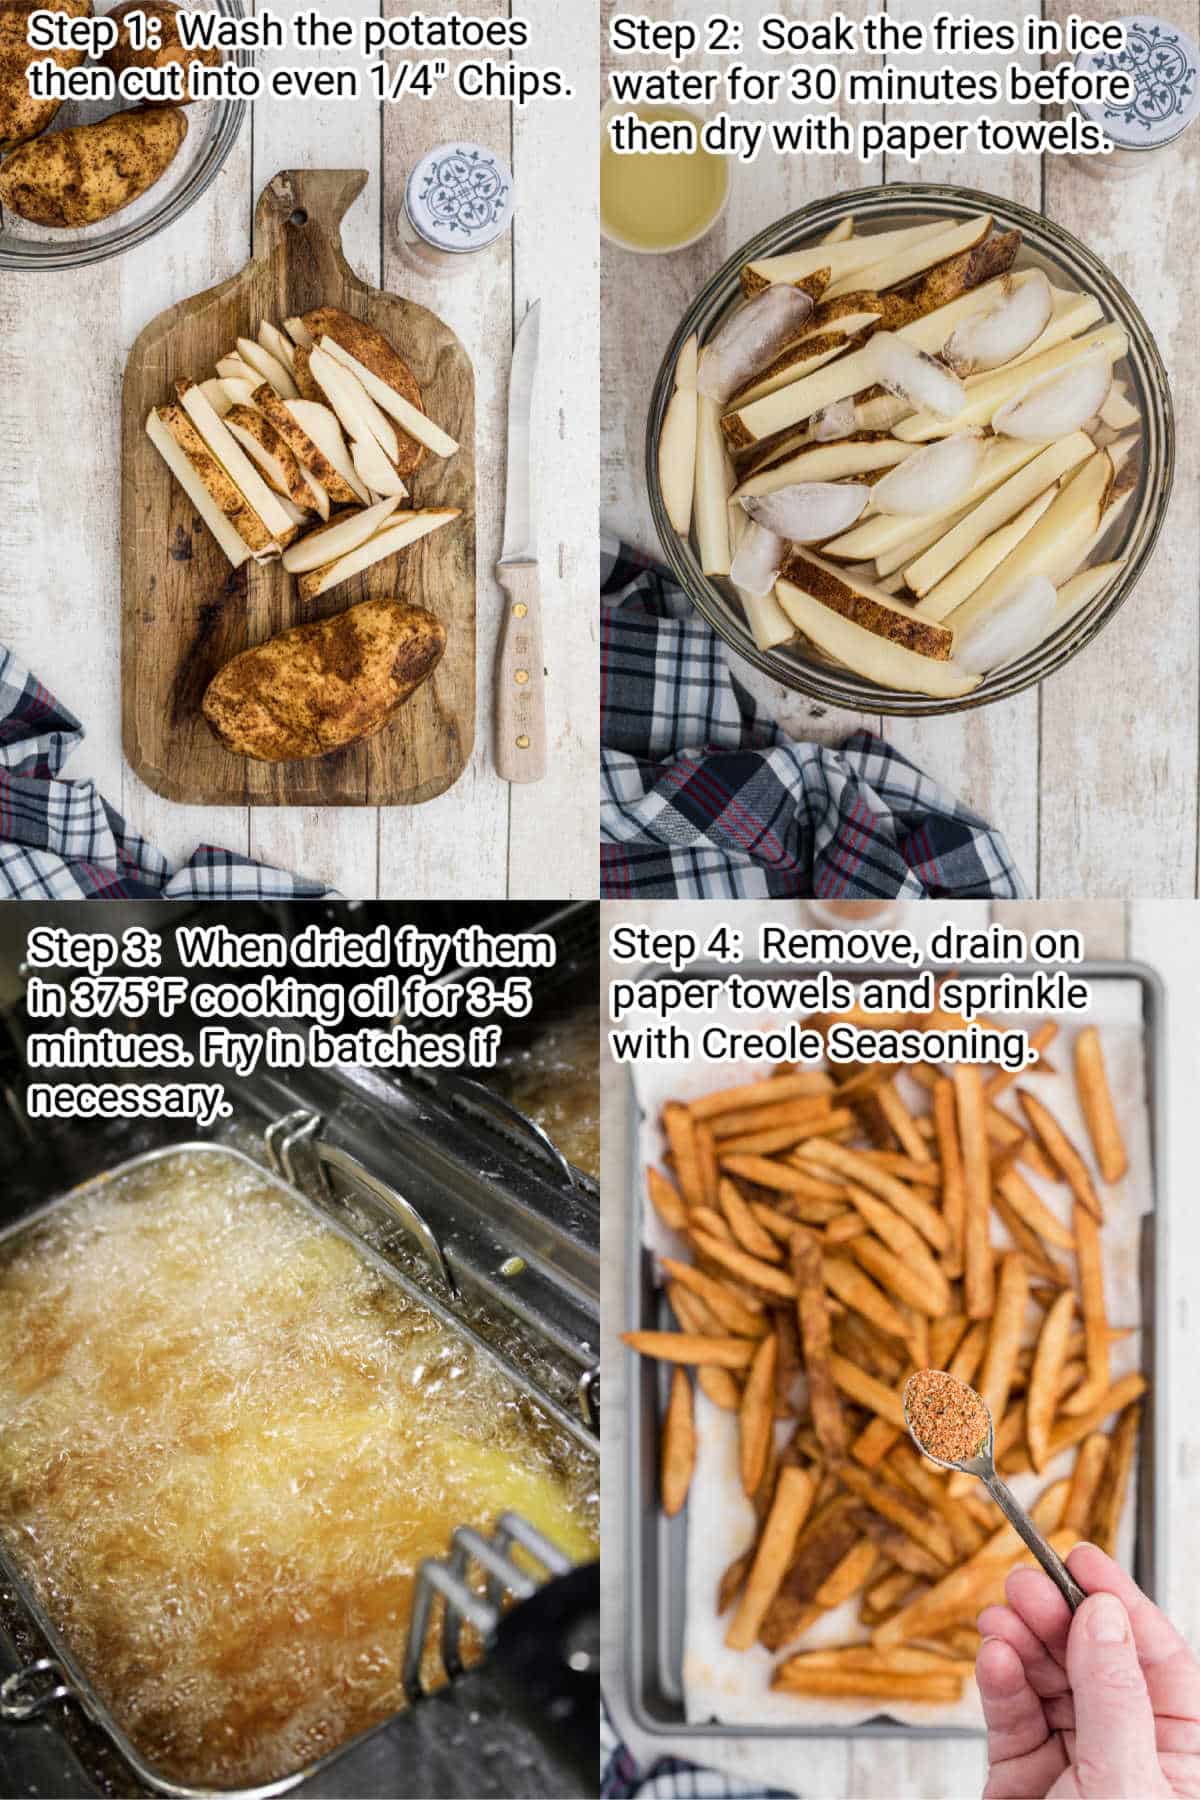 four images showing how to make popeyes cajun fries